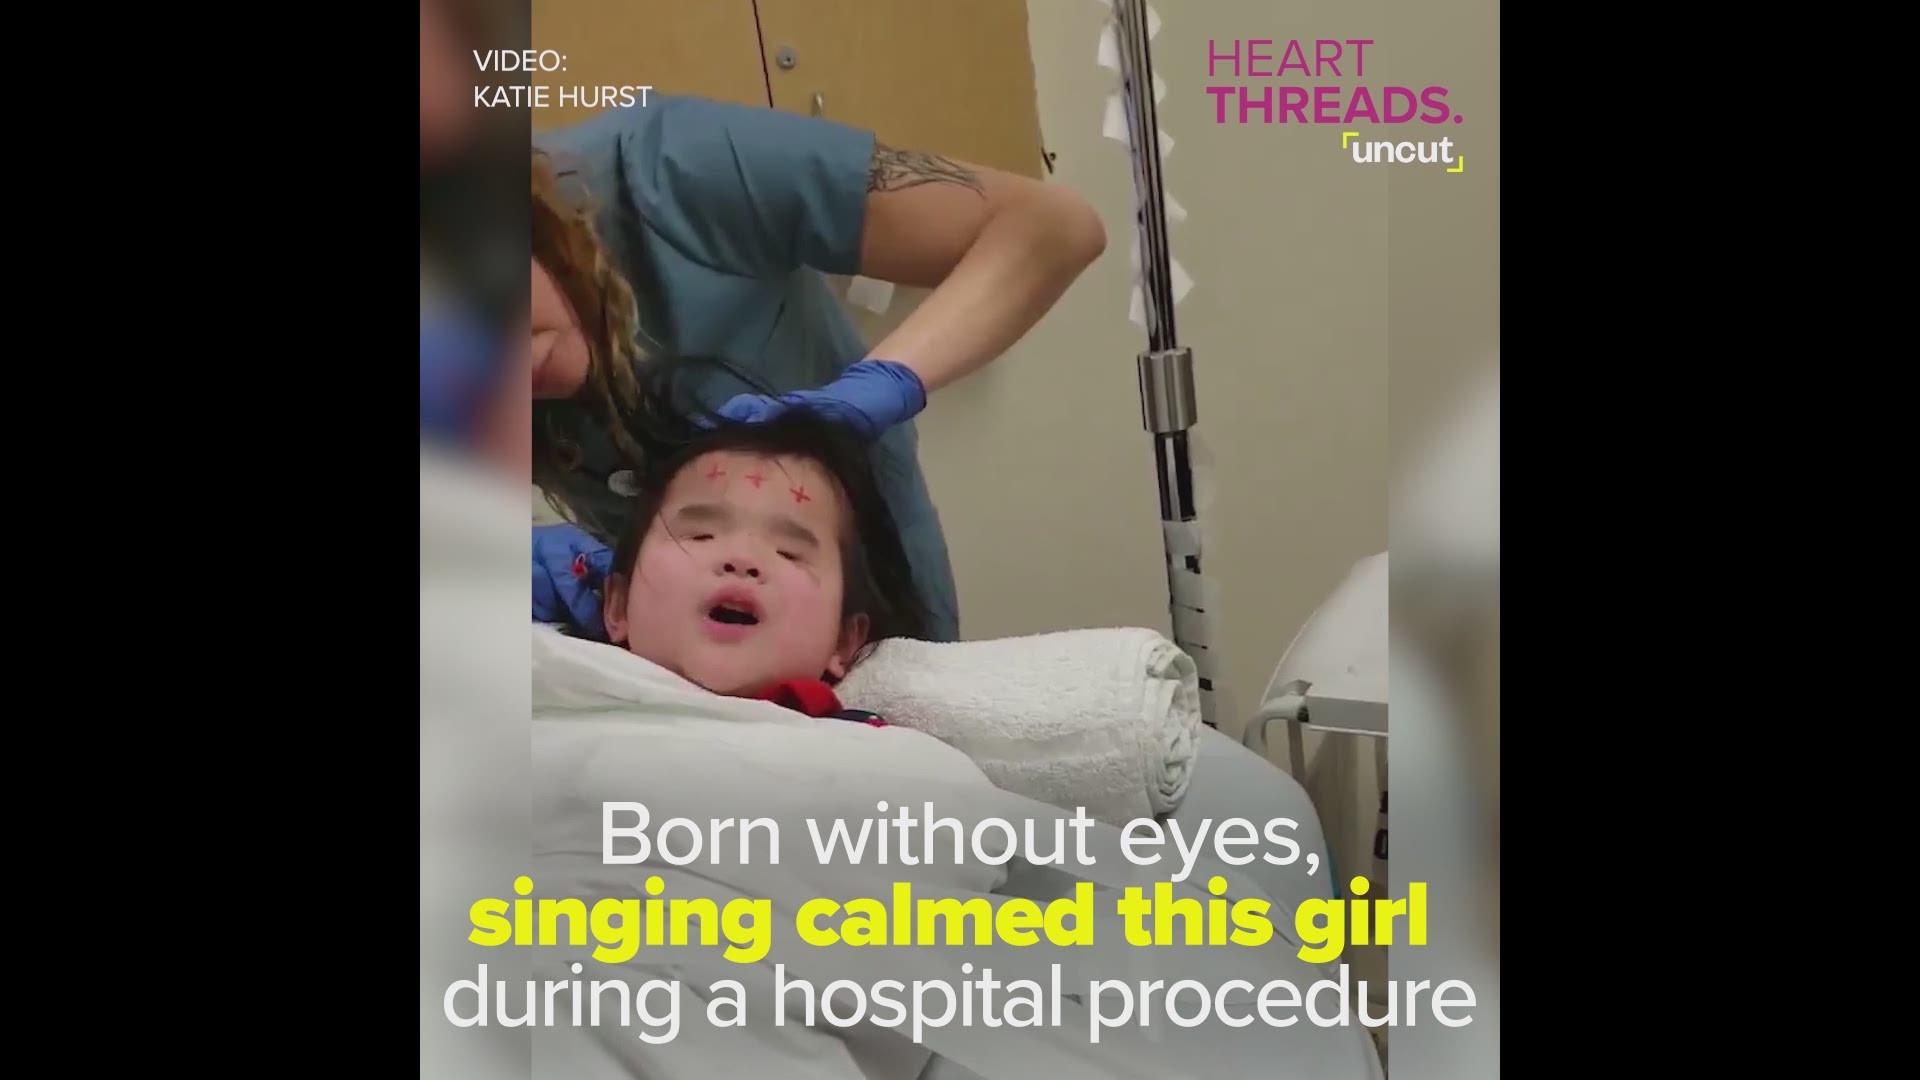 Evie, who was born without eyes, gets very scared at the doctor's. So when she had a panic attack, a music therapist helped her calm down by singing Alessia Cara's "Scars to Your Beautiful."